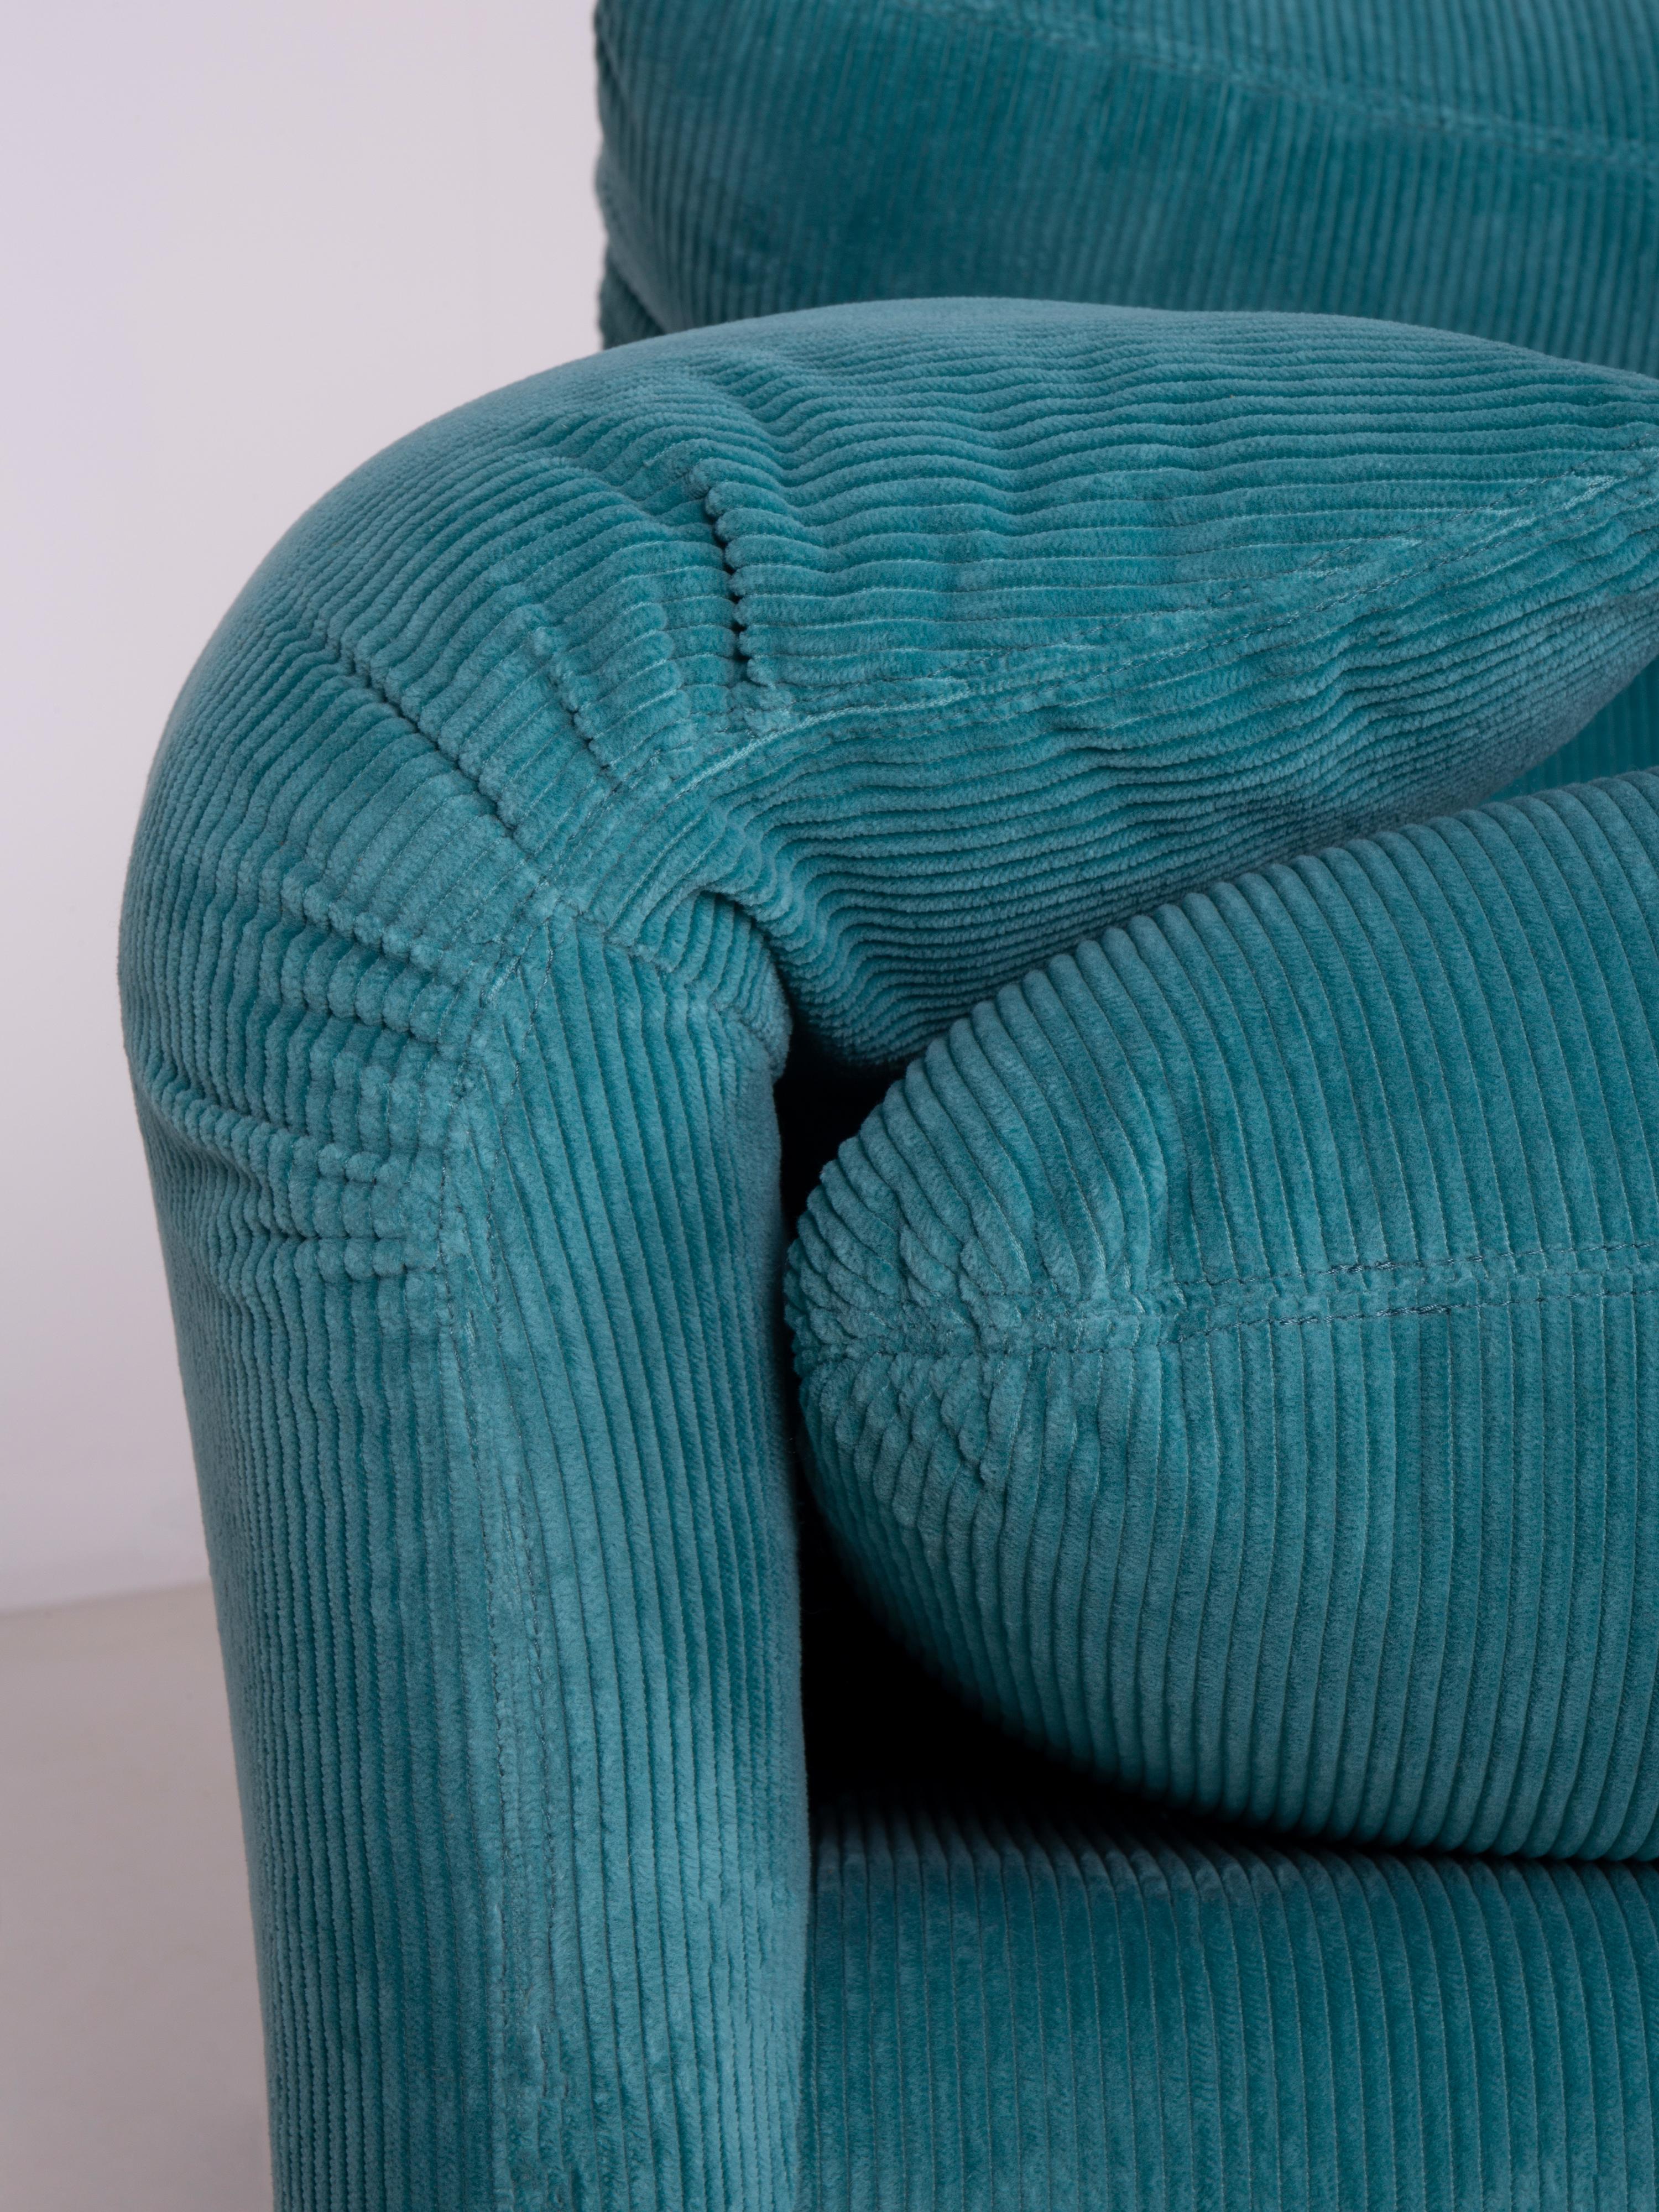 Late 20th Century Pair of Maralunga Armchairs by Vico Magistretti in Ocean Green Corduroy For Sale